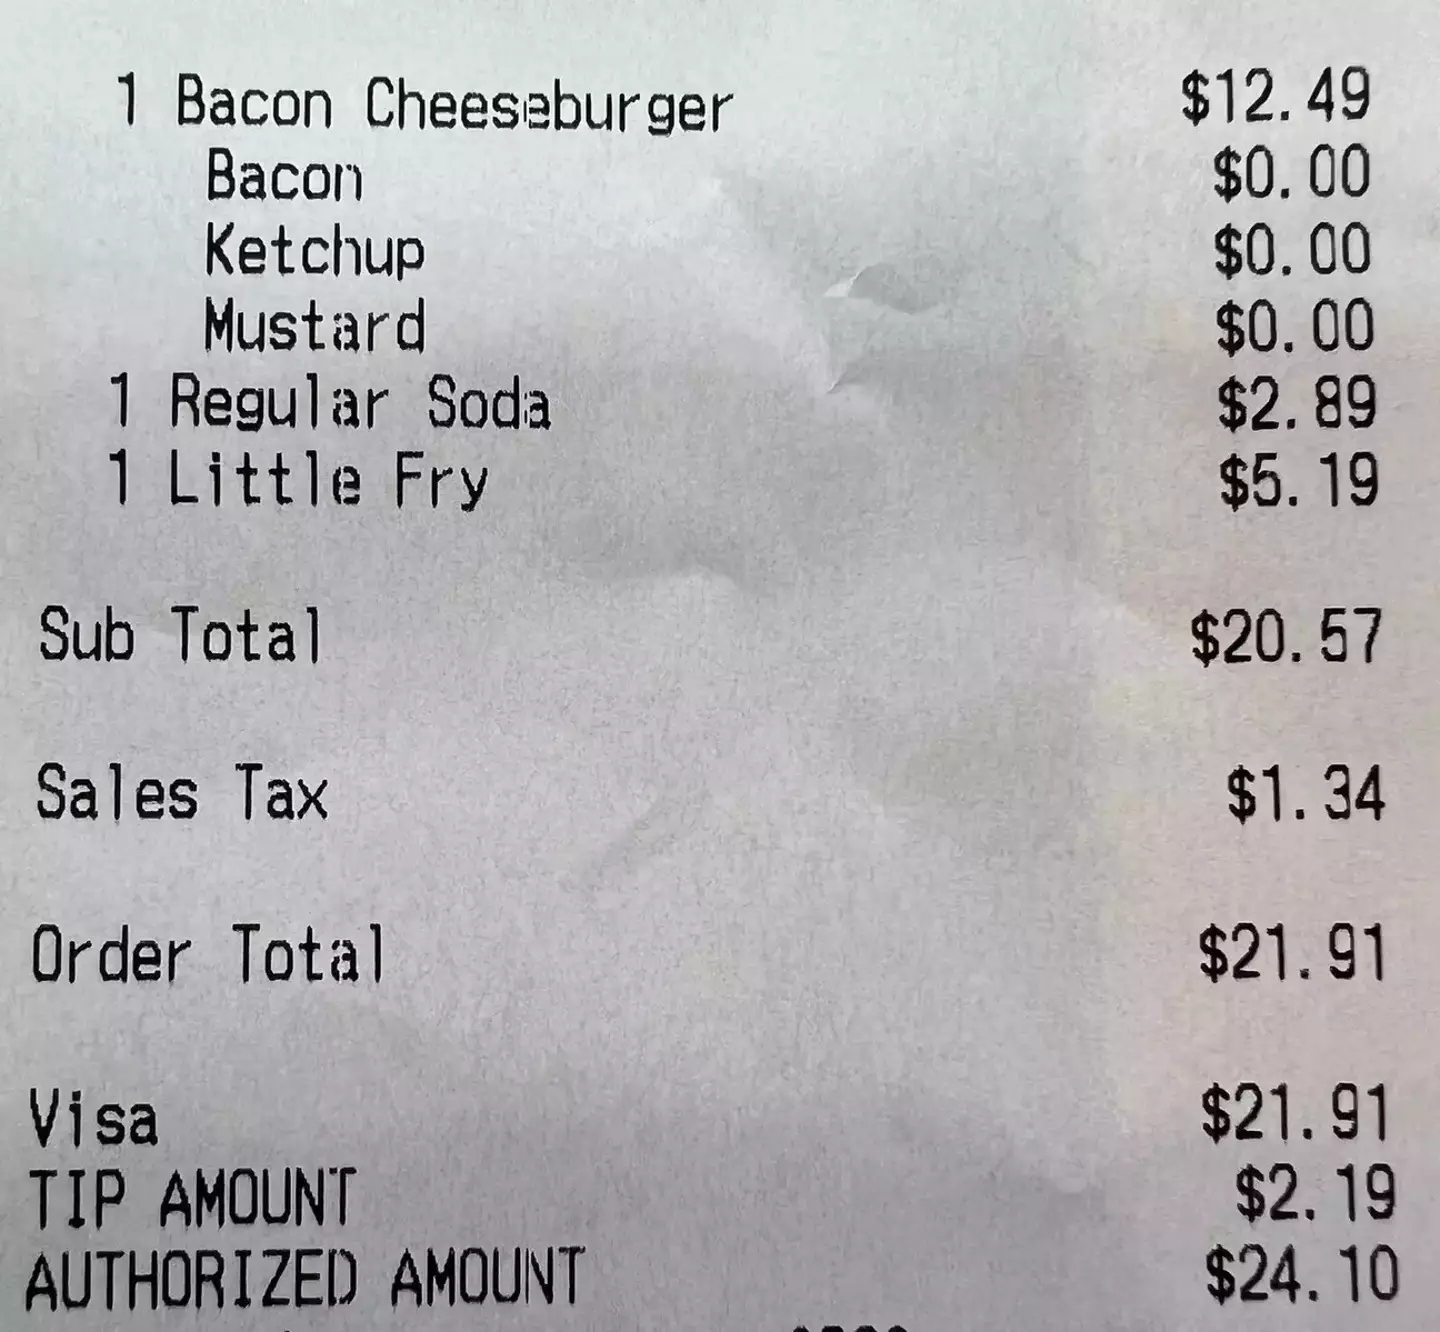 The receipt showed just how much the burger, fries, and soda cost.